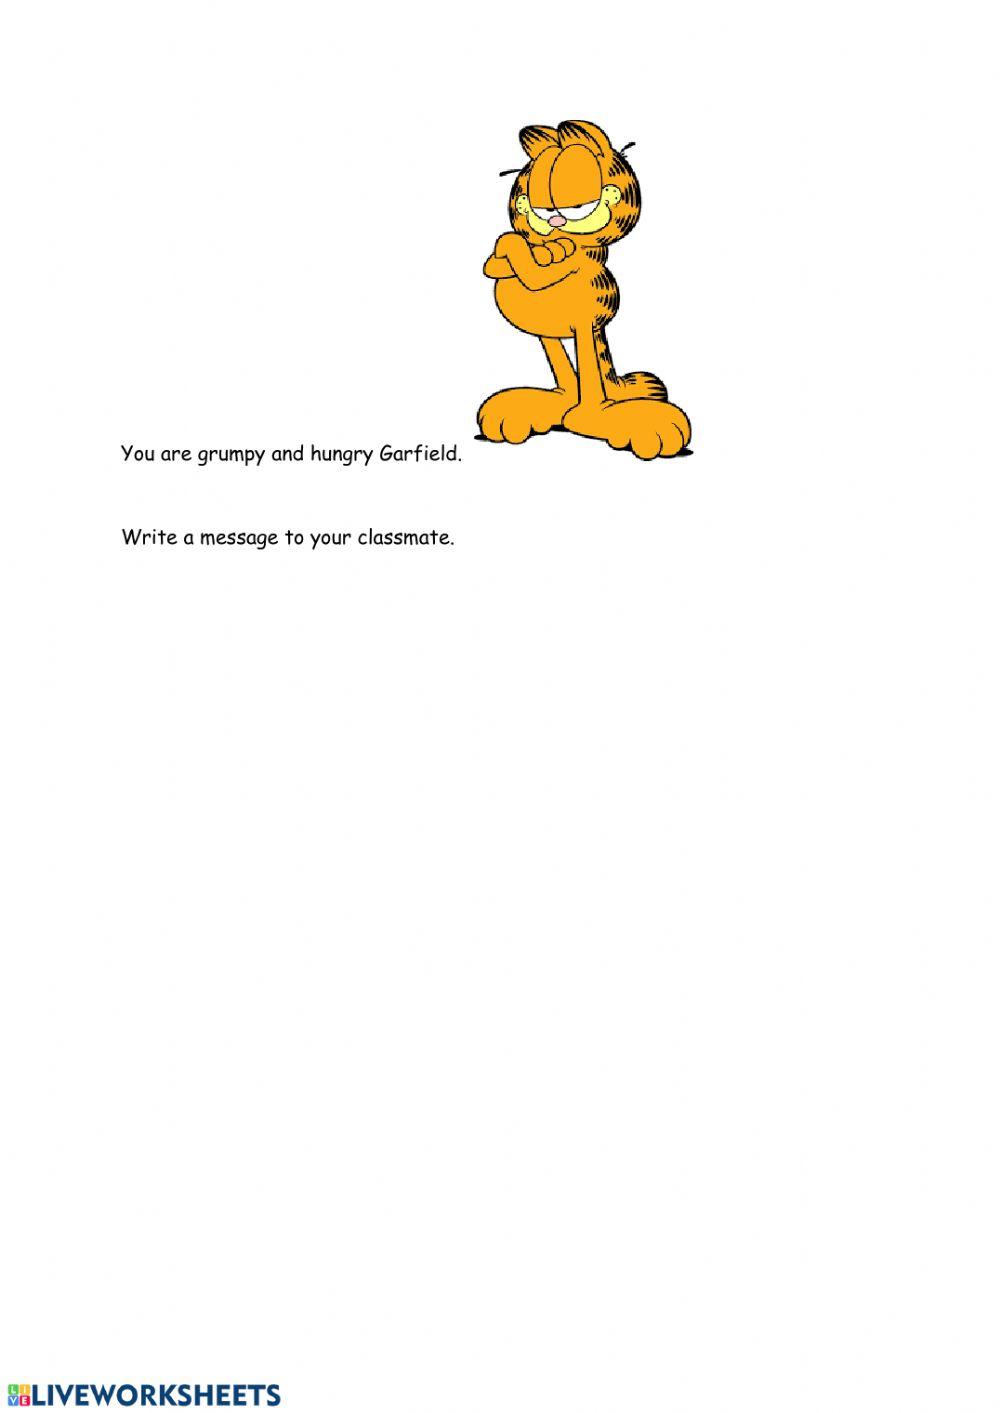 A message from Garfield